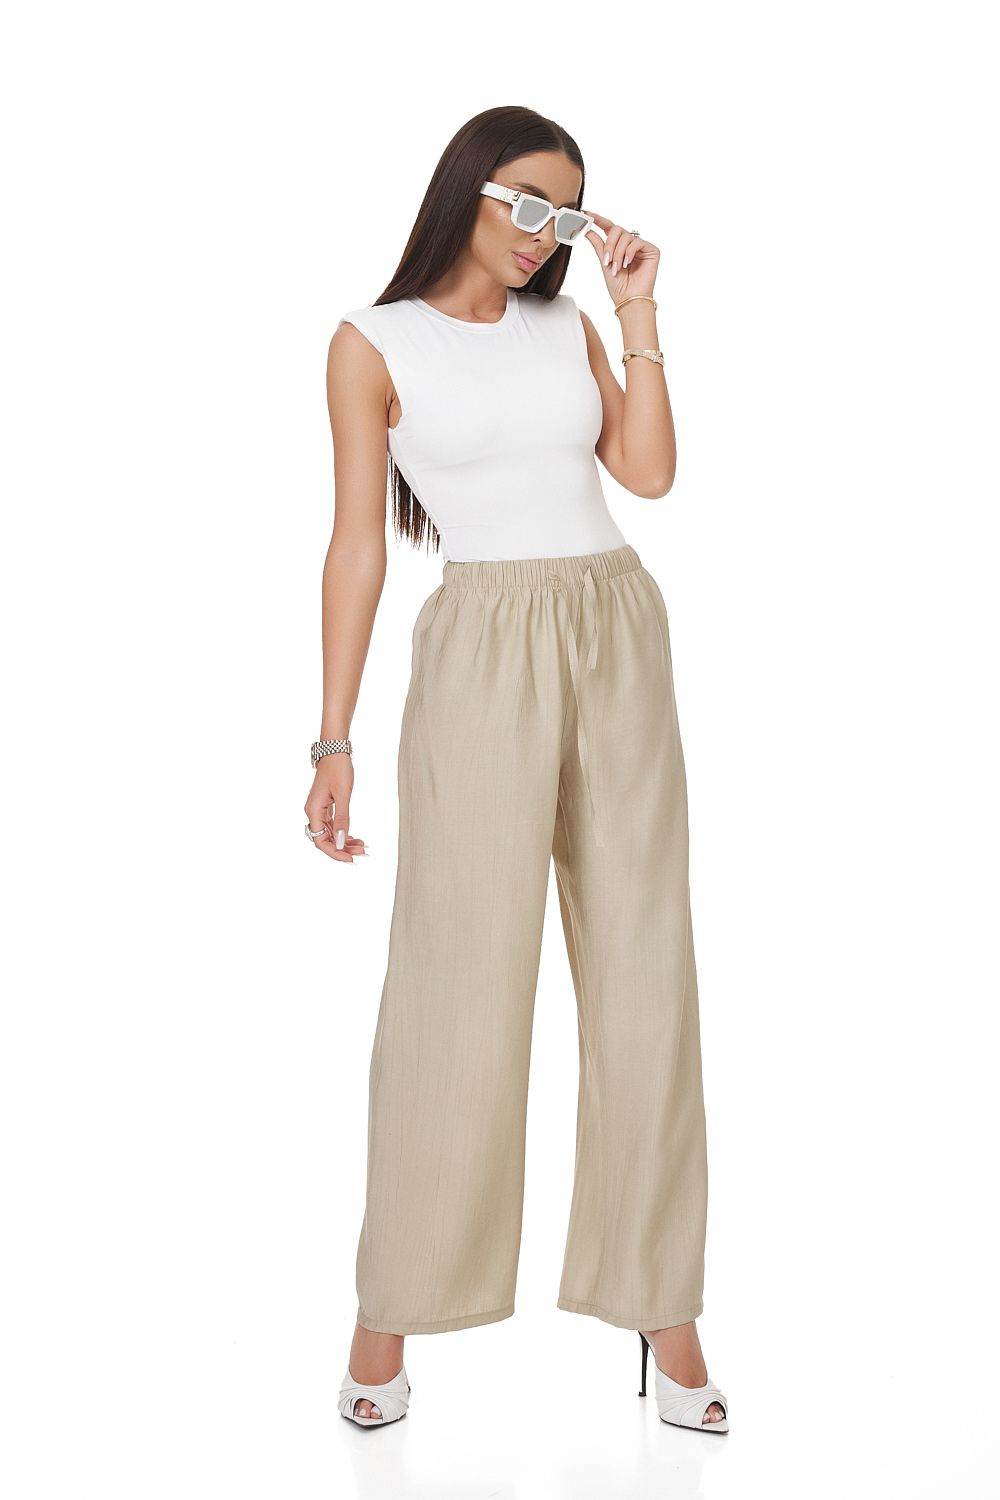 Chrissy Bogas casual beige trousers